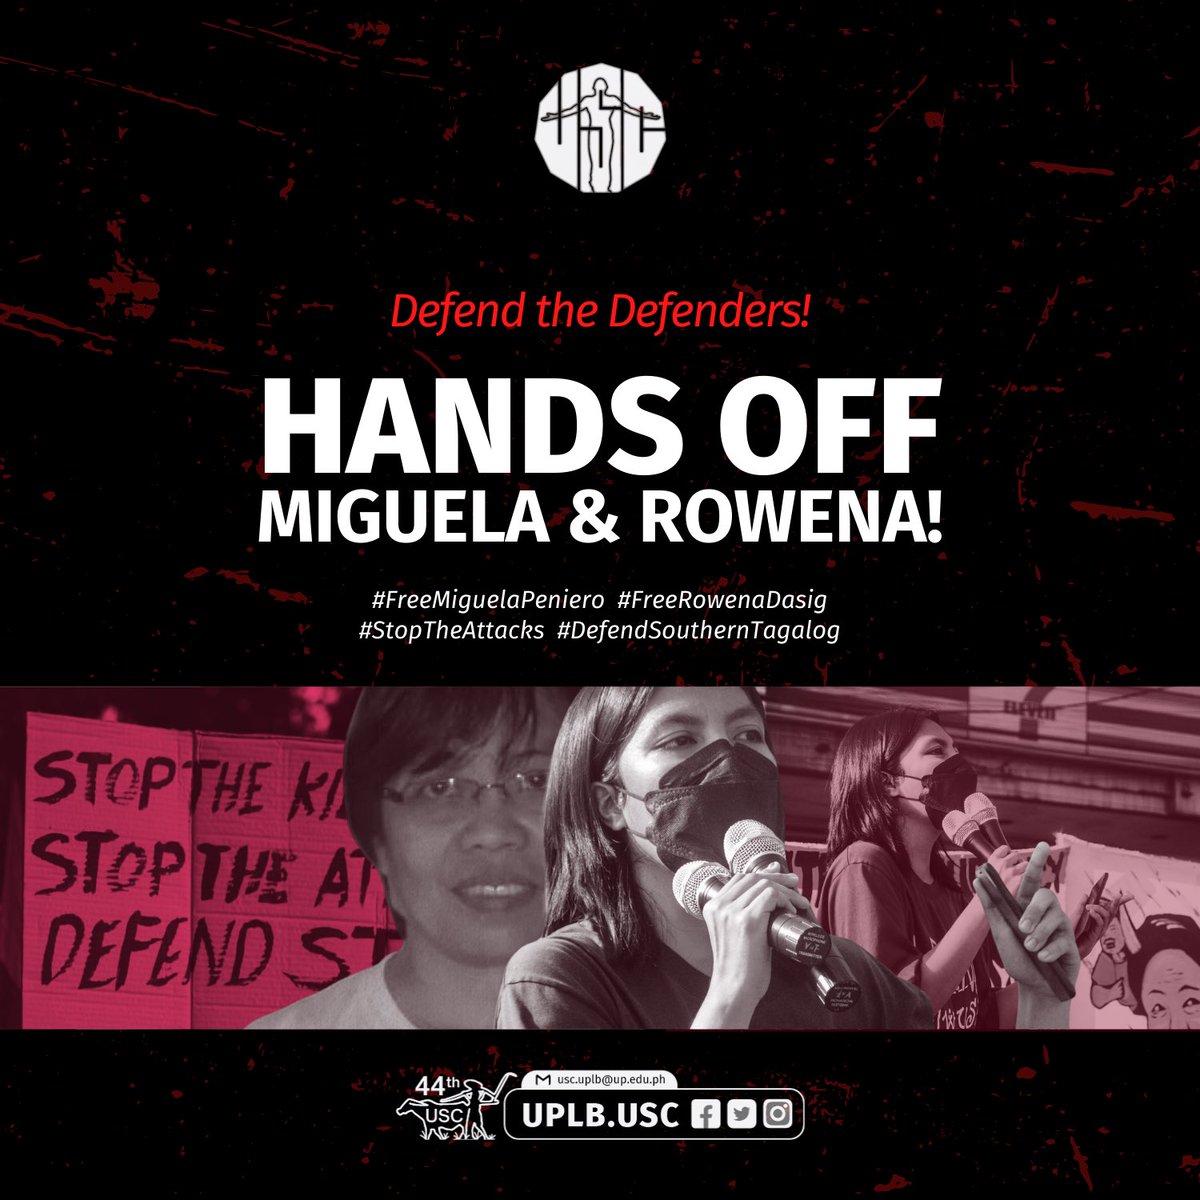 [OFFICIAL STATEMENT OF THE UPLB USC ON THE ARREST OF TWO ACTIVISTS IN ATIMONAN, QUEZON]

HANDS OFF COMMUNITY WORKERS! FREE MIGUELA AND ROWENA!

Read the full statement here: facebook.com/UPLB.USC/posts…

#FreeMiguelaPeniero
#FreeRowenaDasig
#StopTheAttacks
#DefendSouthernTagalog